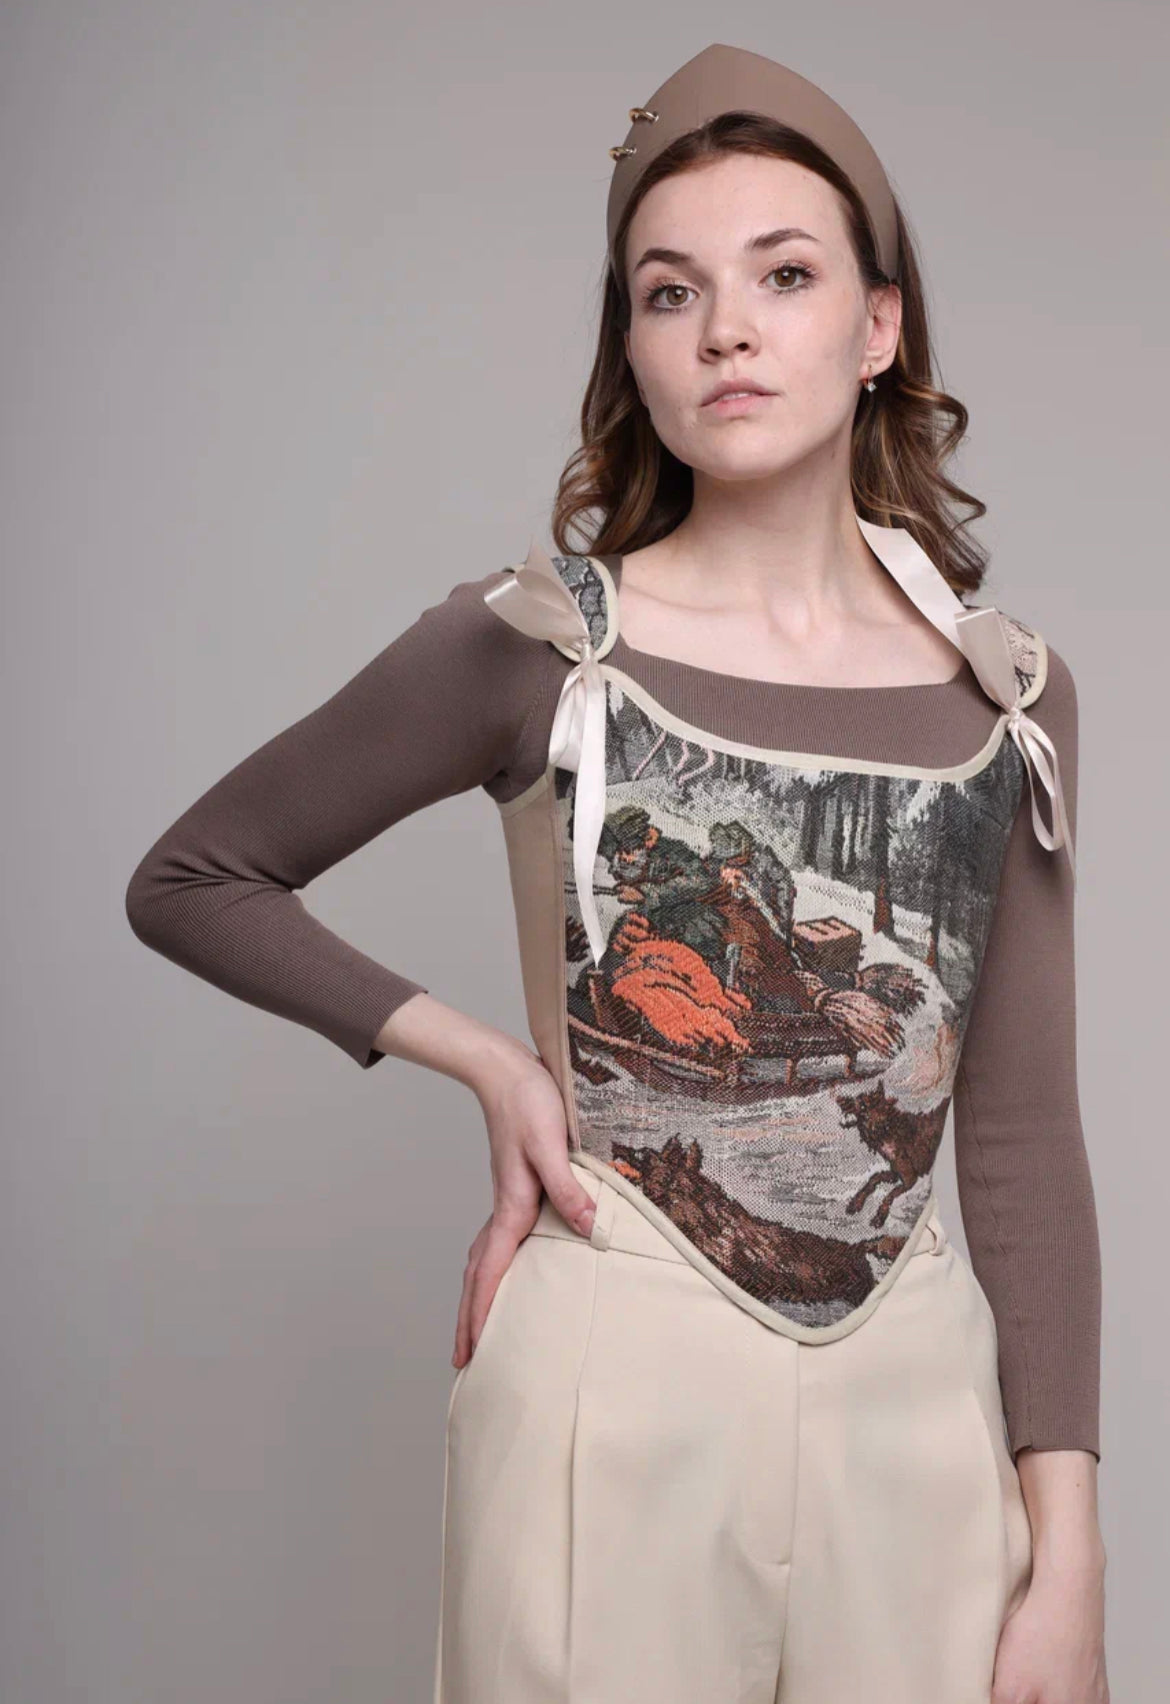 NEW Lace-up Vintage Tapestry Corset Top, "Hunting Scene” Pattern, Size S-M (US 4-8)